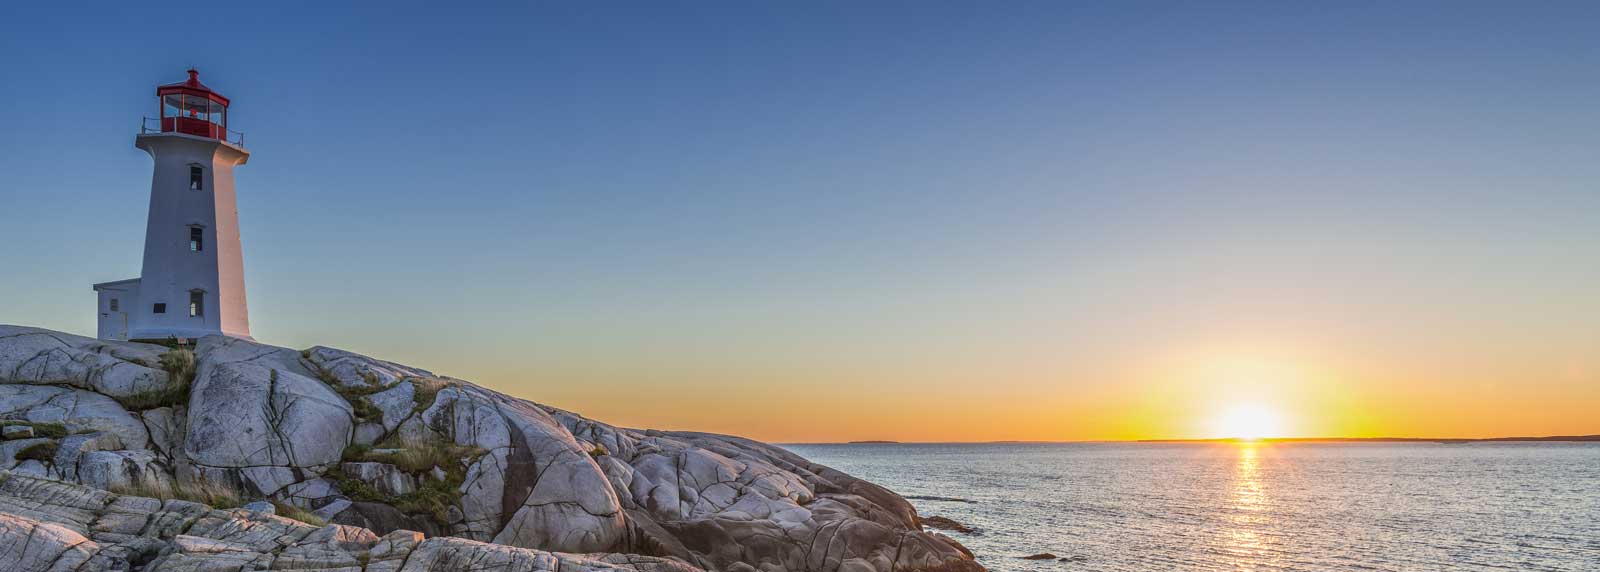 Panorma of Peggys Cove's lighthouse at sunset